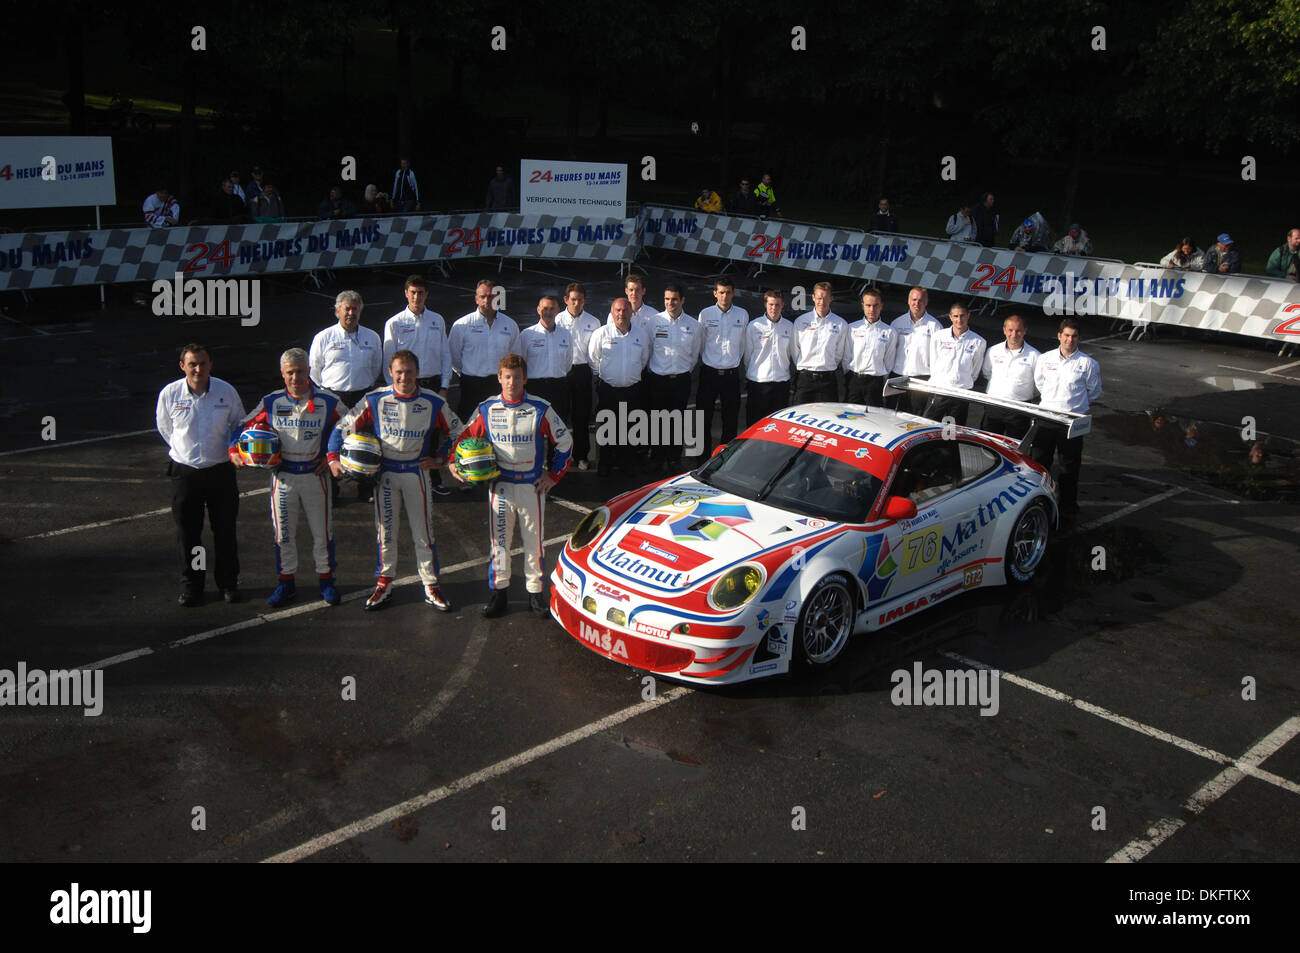 June 8, 2009 - Le Mans, France - The IMSA-Matmut Porsche photoshoot, including drivers, RAYMOND NARAC, of France, PATRICK PILET, of France, and PATRICK LONG, during scrutineering for the 24 Hours of Le Mans, Monday, June 8, 2009, in Le Mans, France. (Credit Image: © Rainier Ehrhardt/ZUMAPRESS.com) Stock Photo